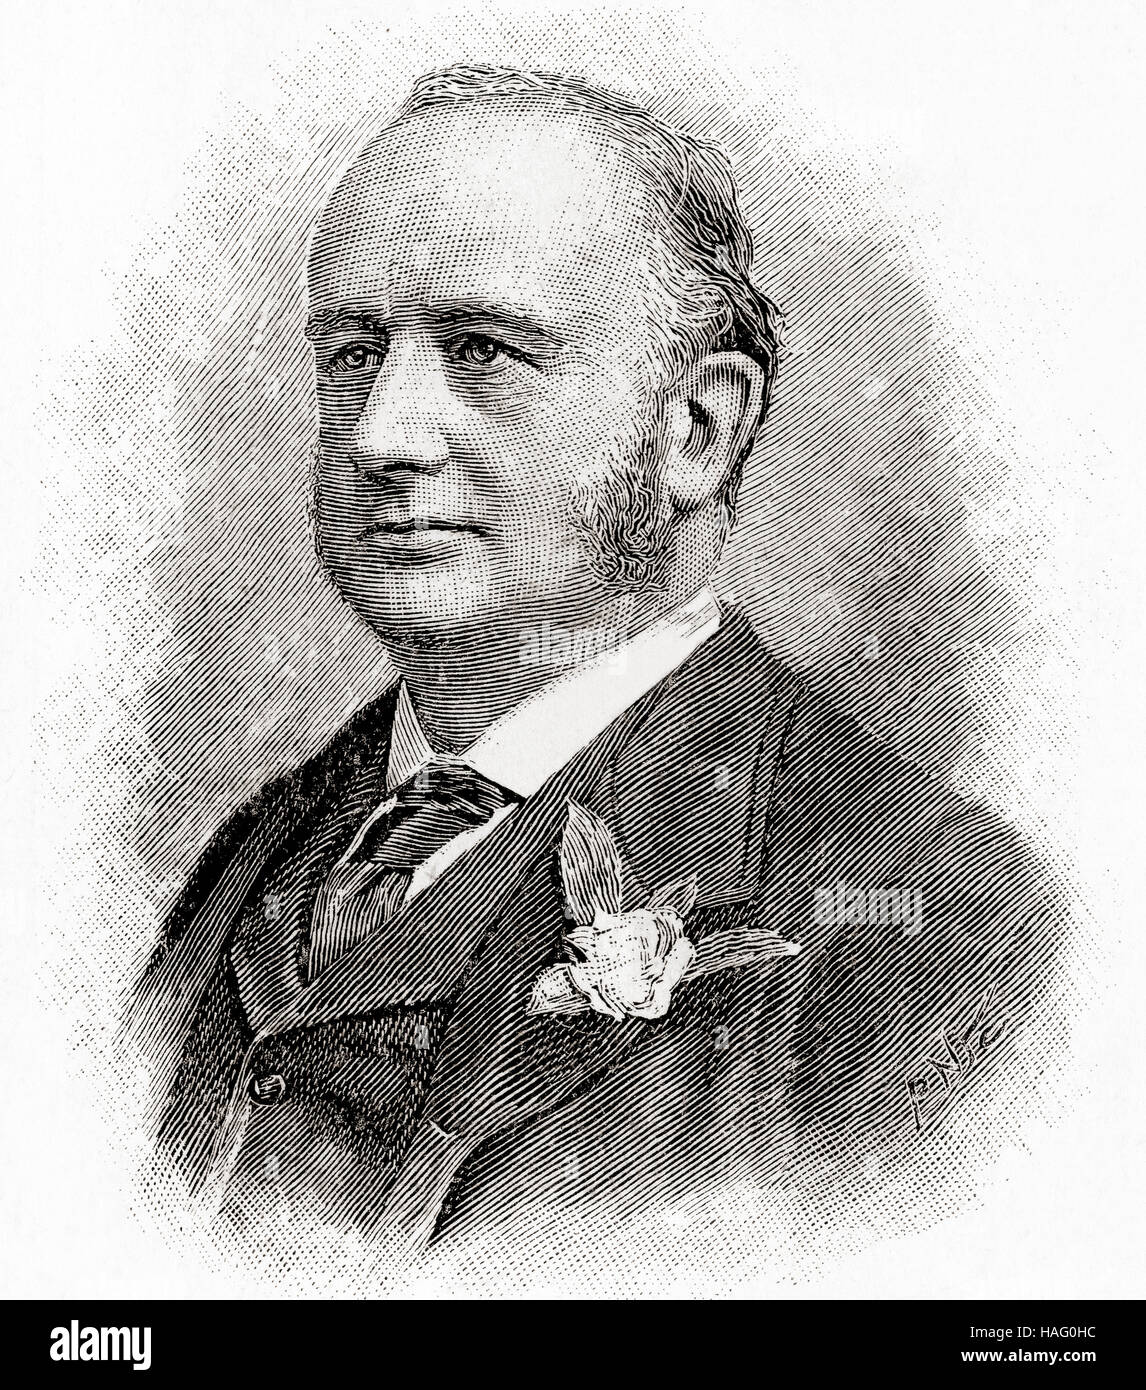 Richard Everard Webster, 1st Viscount Alverstone, 1842 - 1915.  British barrister, politician and judge.  From The Strand Magazine, Vol I January to June, 1891. Stock Photo